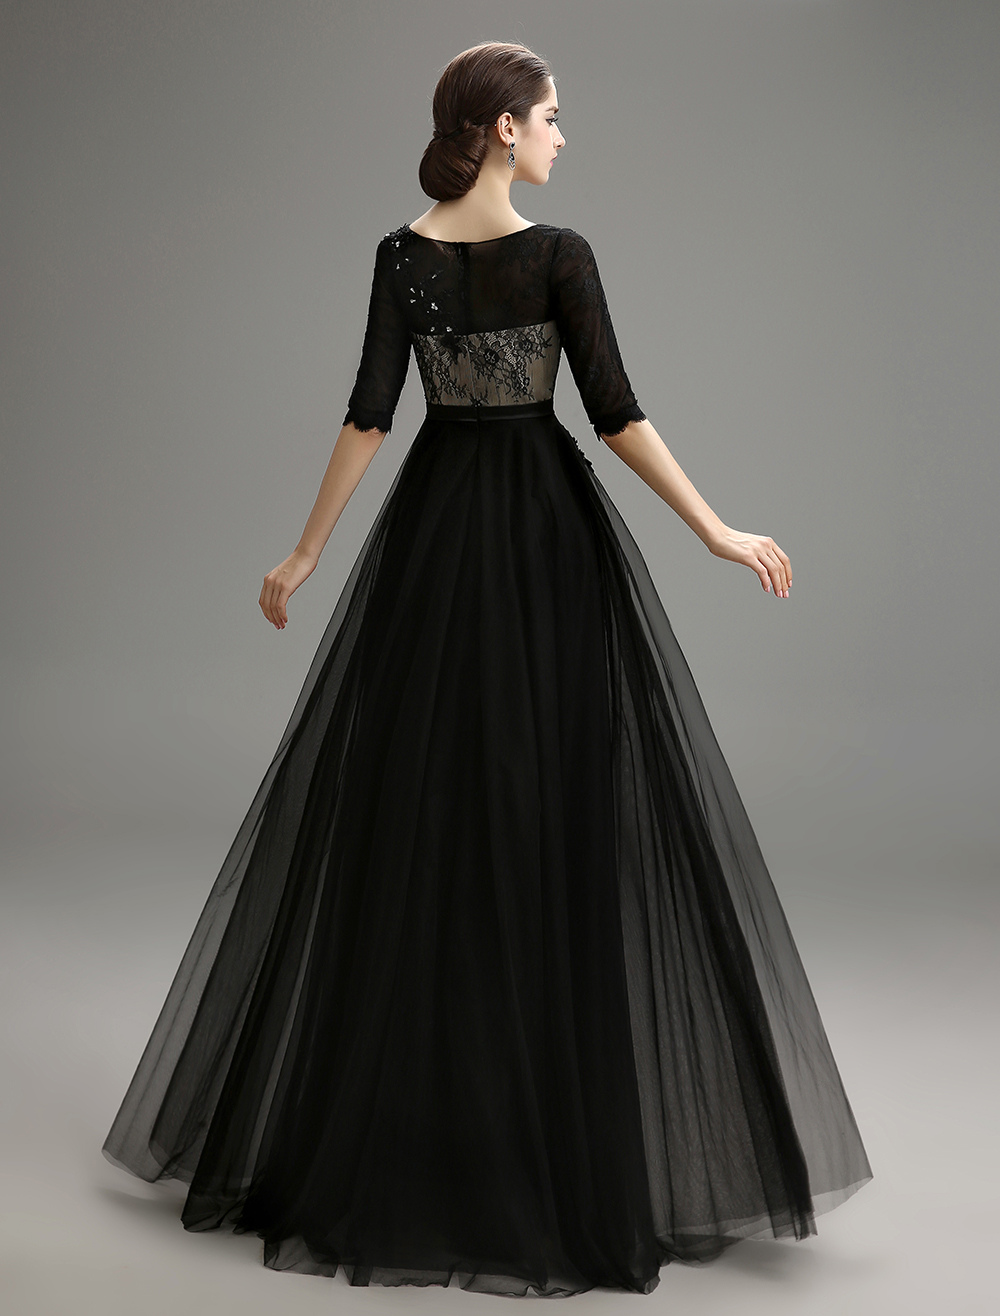 This black wedding dress is made by Milanoo professional tailors, You ...